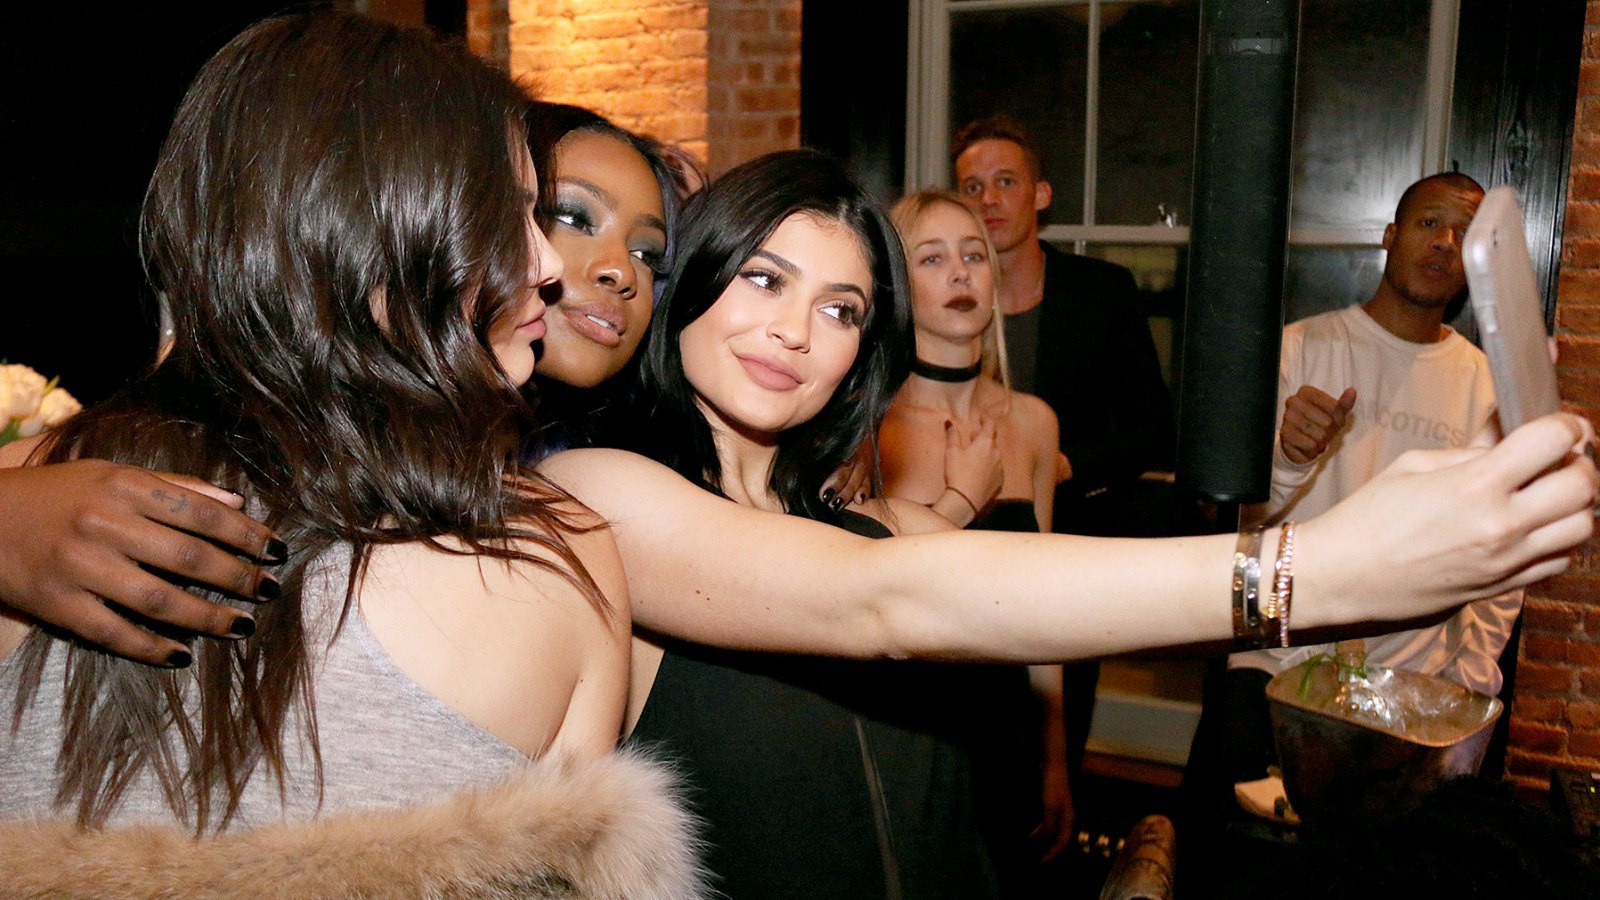 Kendall Jenner, Kylie Jenner and Justine Skye attends the Kendall & Kylie Jenner 2016 Spring Collection Launch.